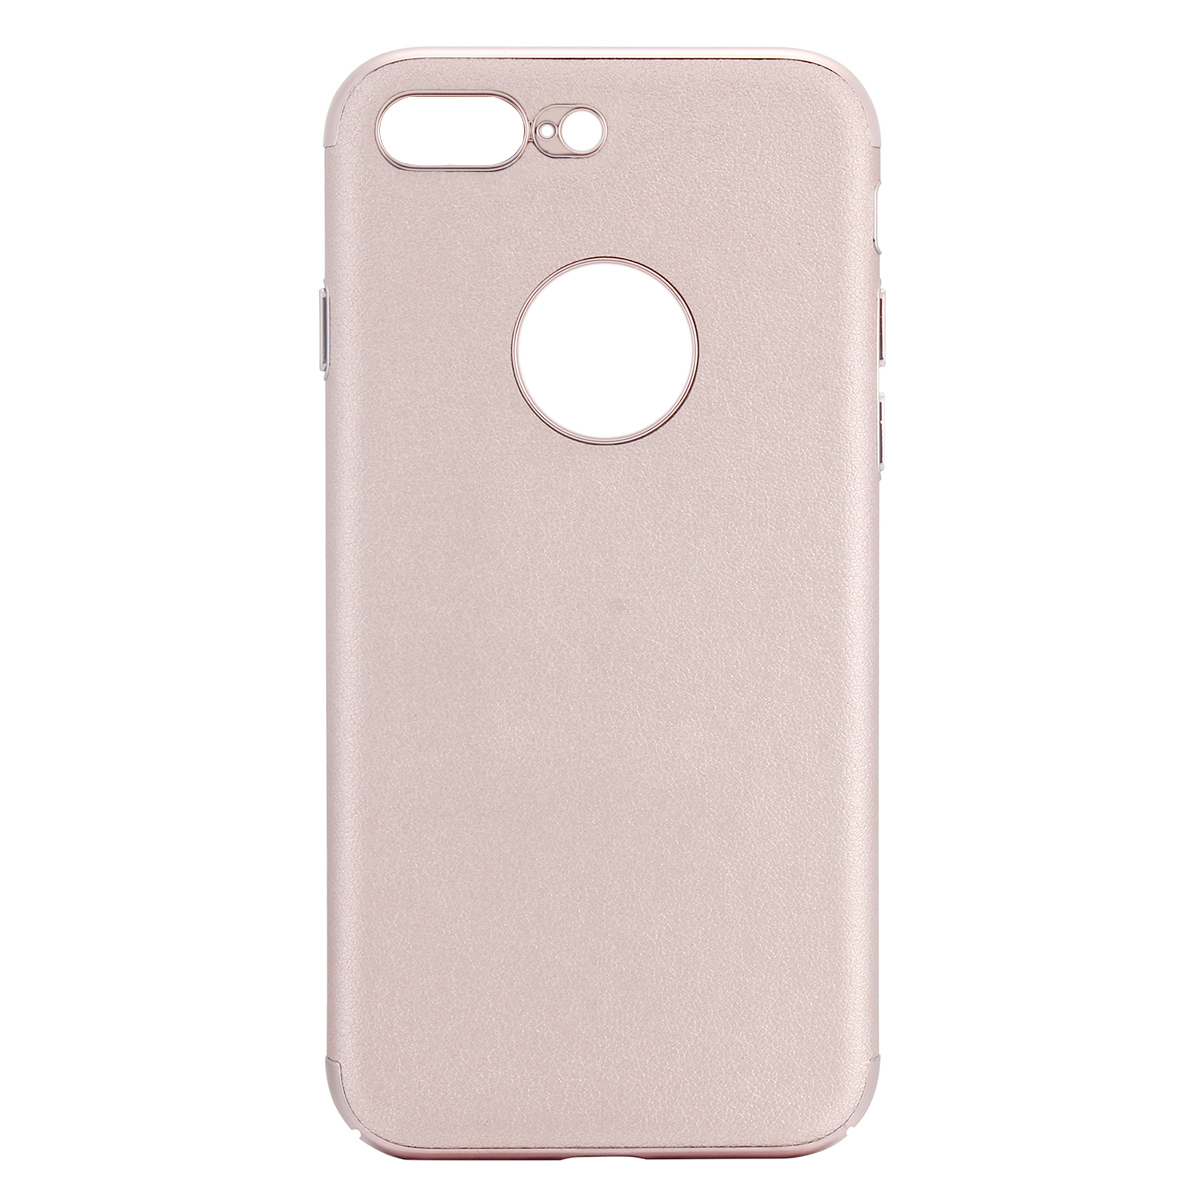 Luxury Hard PC Protective Back Phone Case Cover for iPhone 7 - Rose Gold